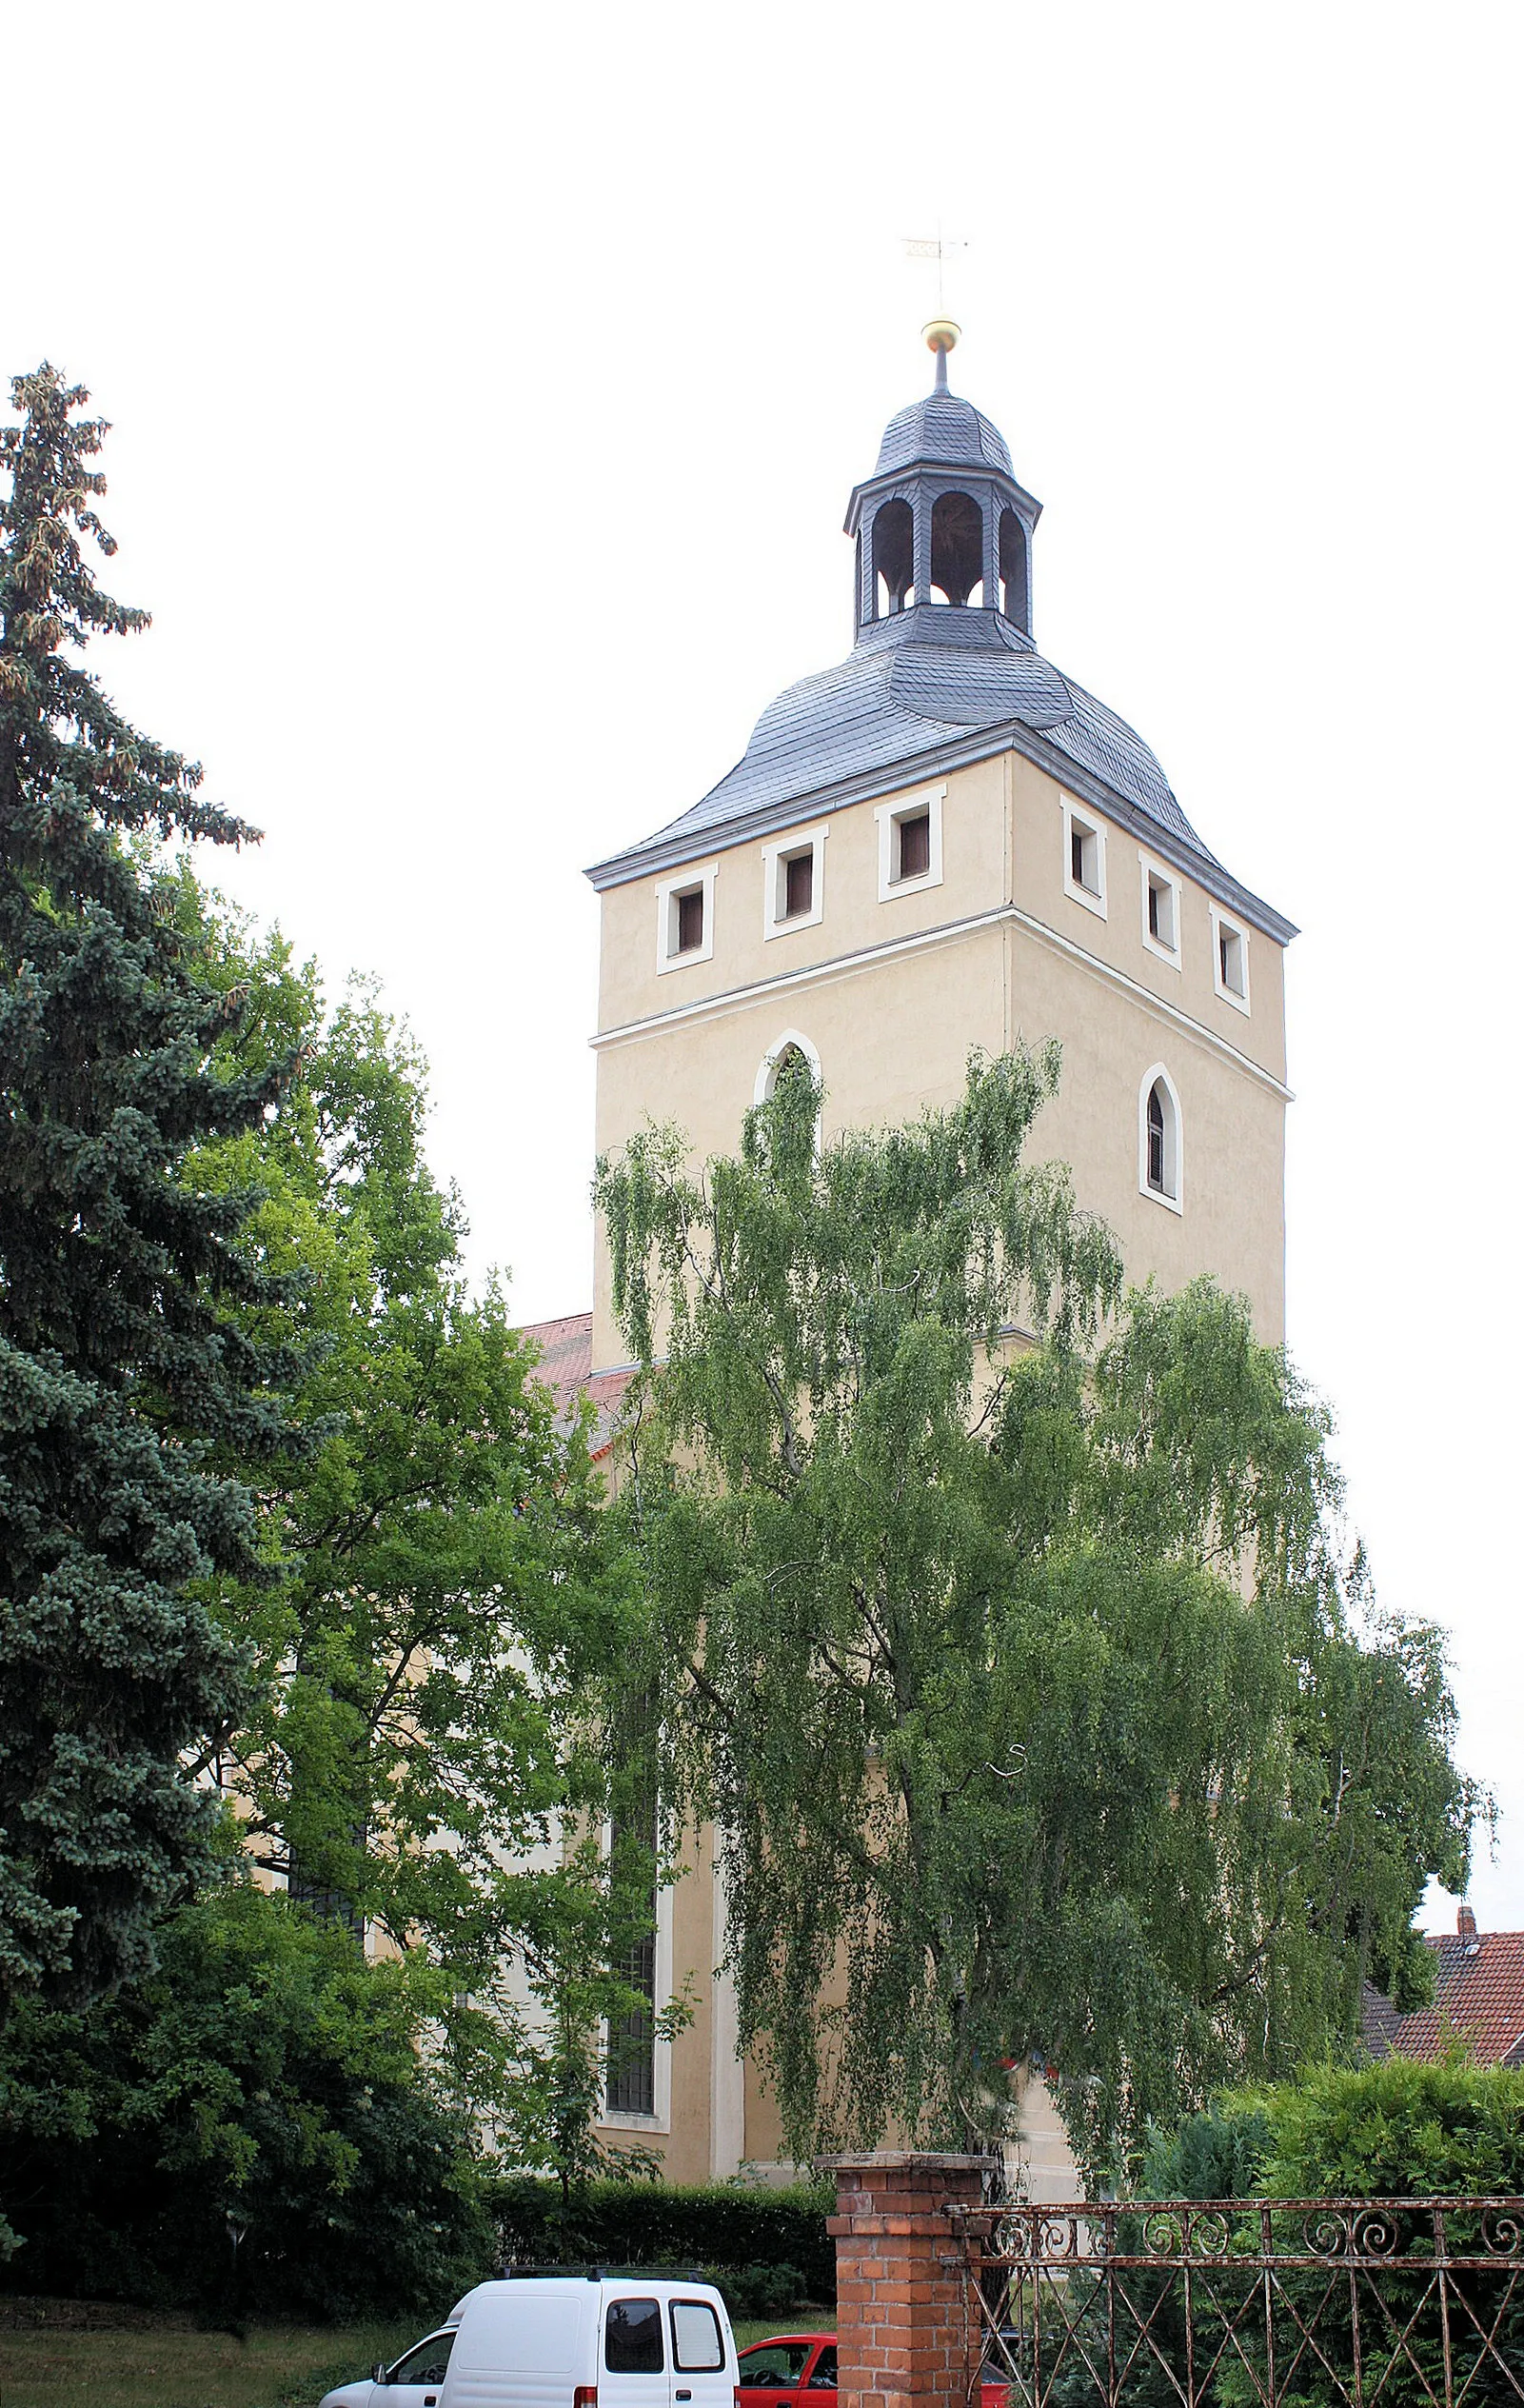 Photo showing: Greußen, the tower of the Saint Martin church